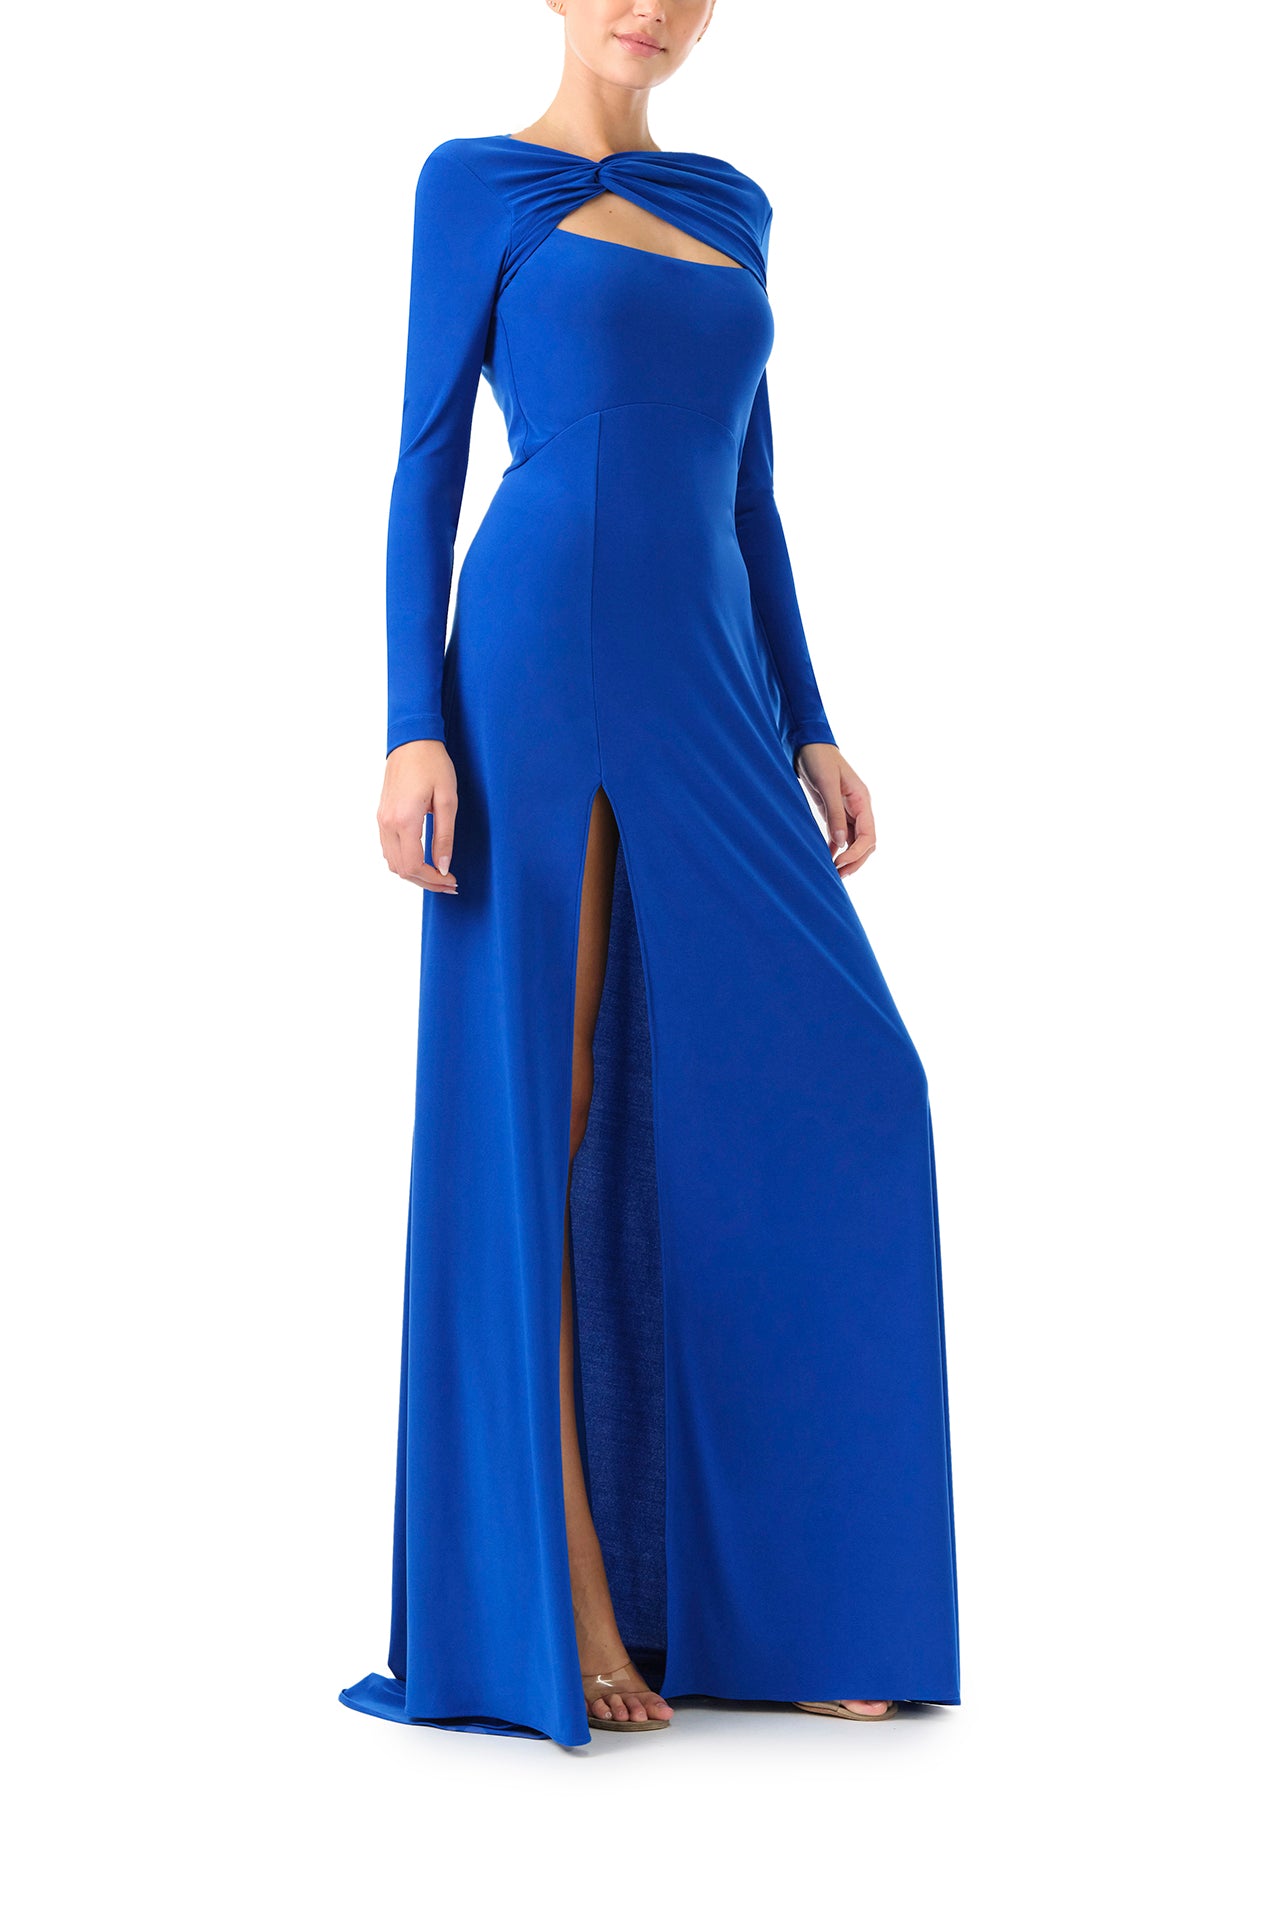 Monique Lhuillier Fall 2024 long sleeve, cobalt jersey gown with knotted keyhole neckline, low v-back and high skirt slit - right side.